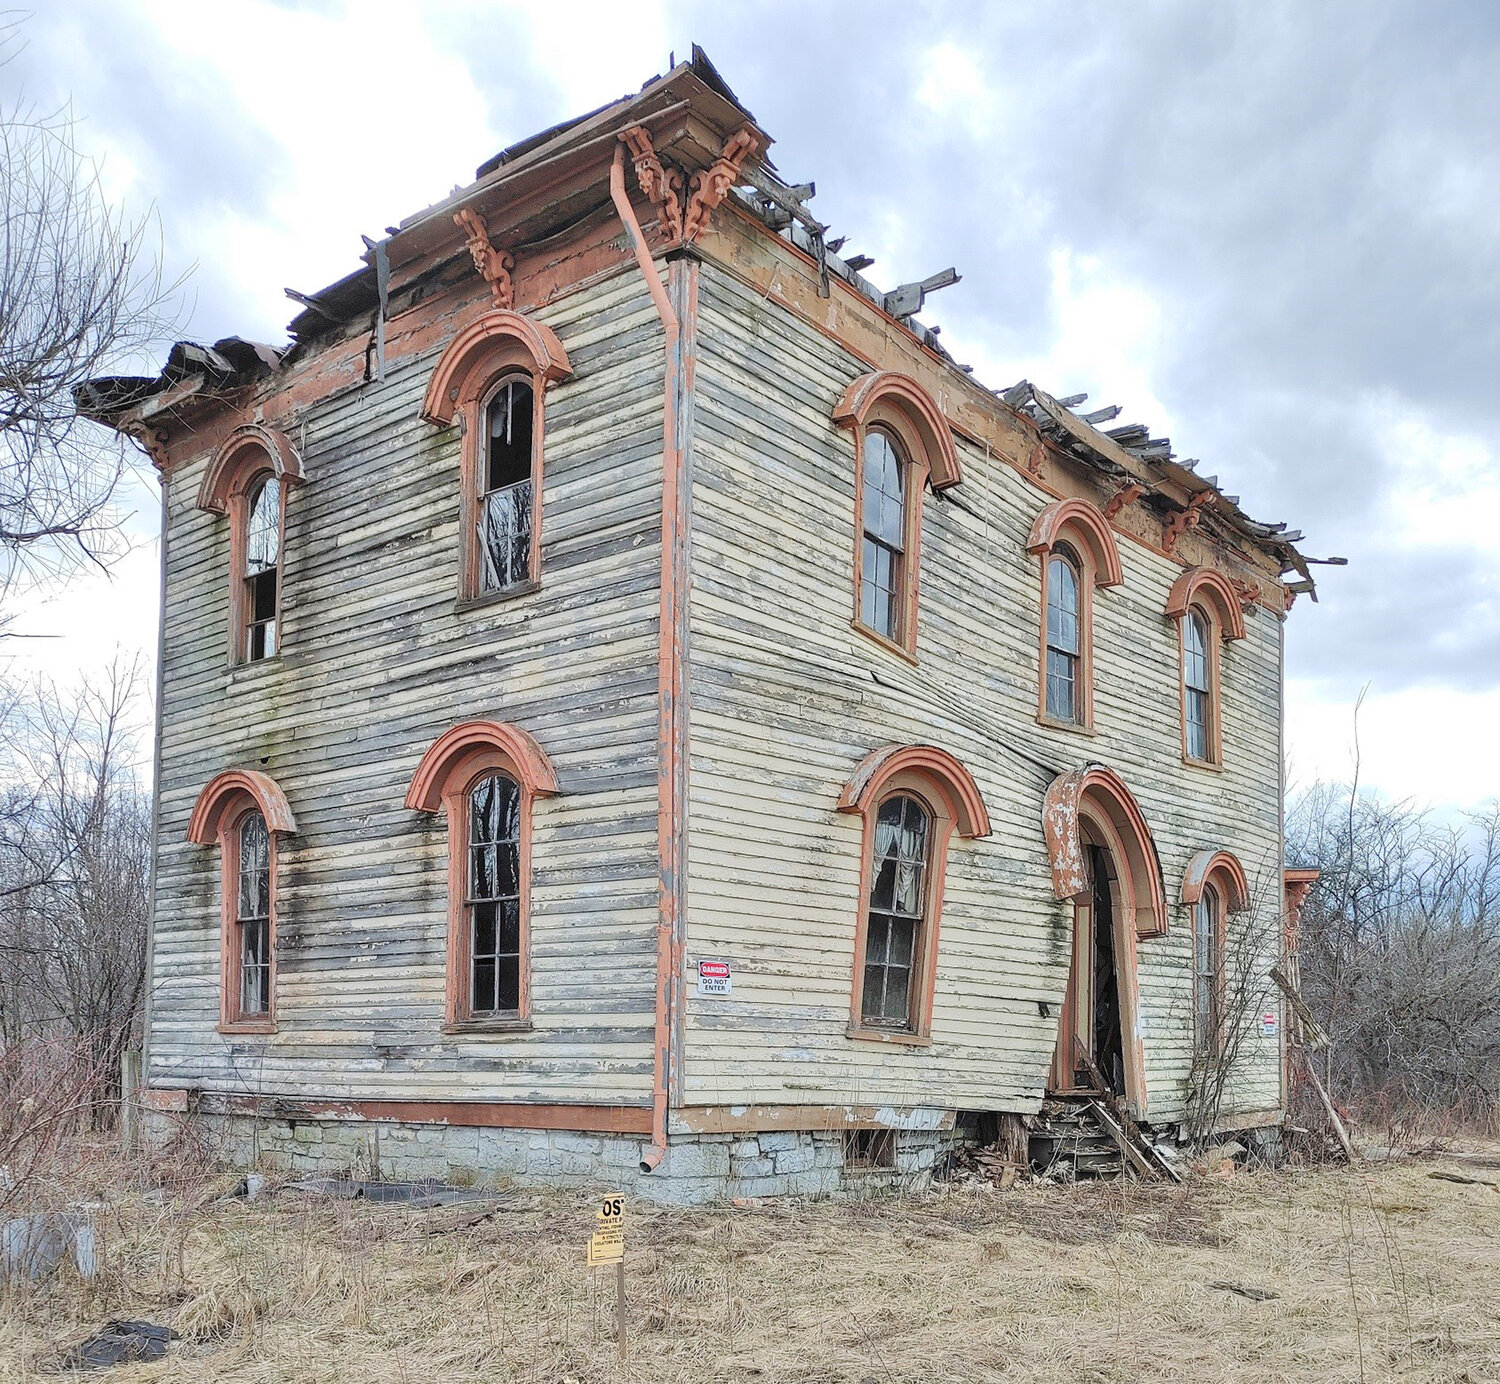 The dilapidated Shull House is part of a lawsuit filed by the Rome Historical Society against the owners of the Erie Canal Village. RHS wants this building demolished, among other property-related demands.